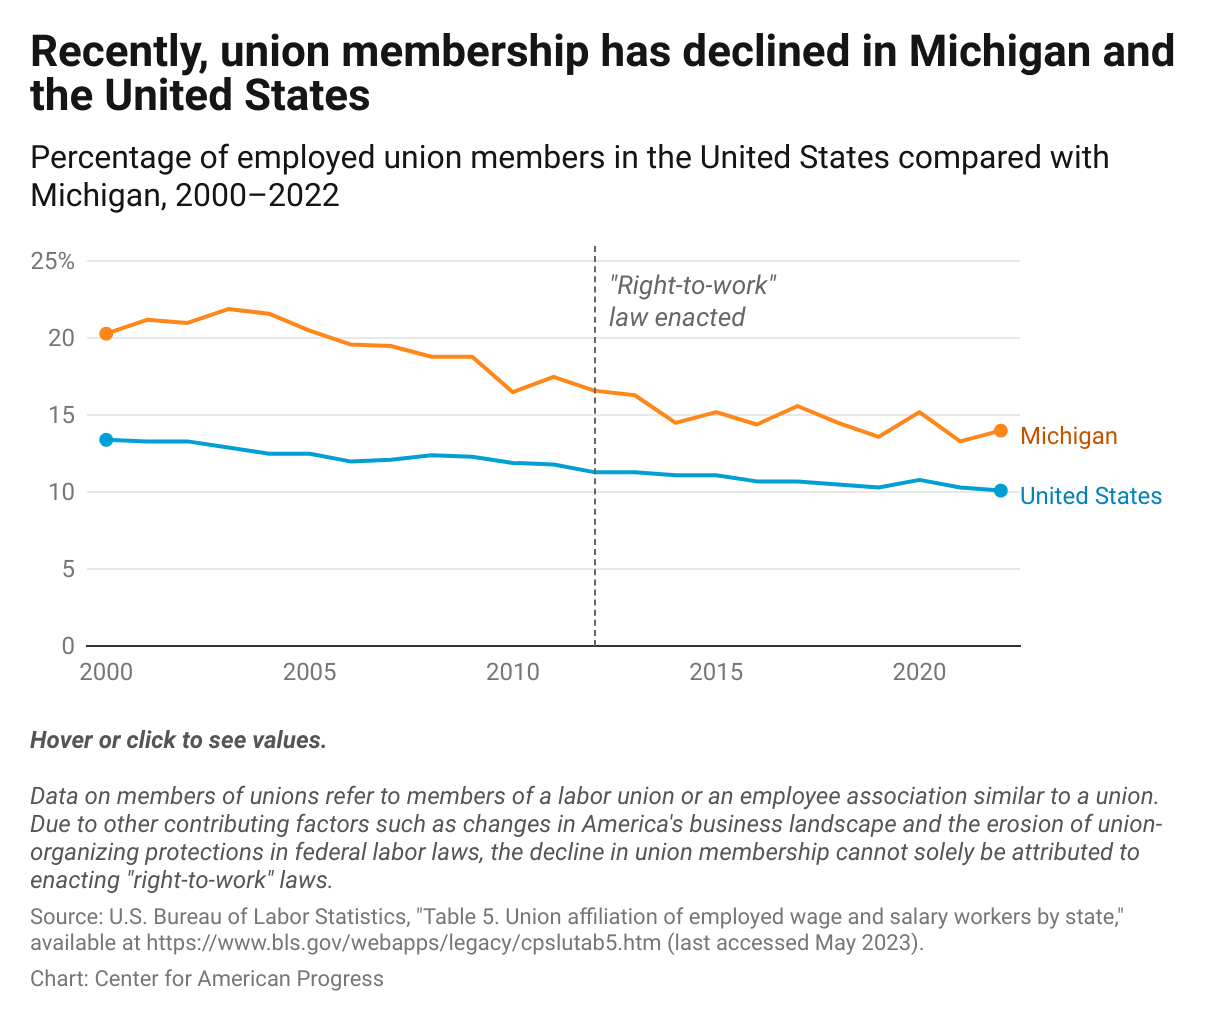 Line graph showing declines in union membership in Michigan compared with the United States.